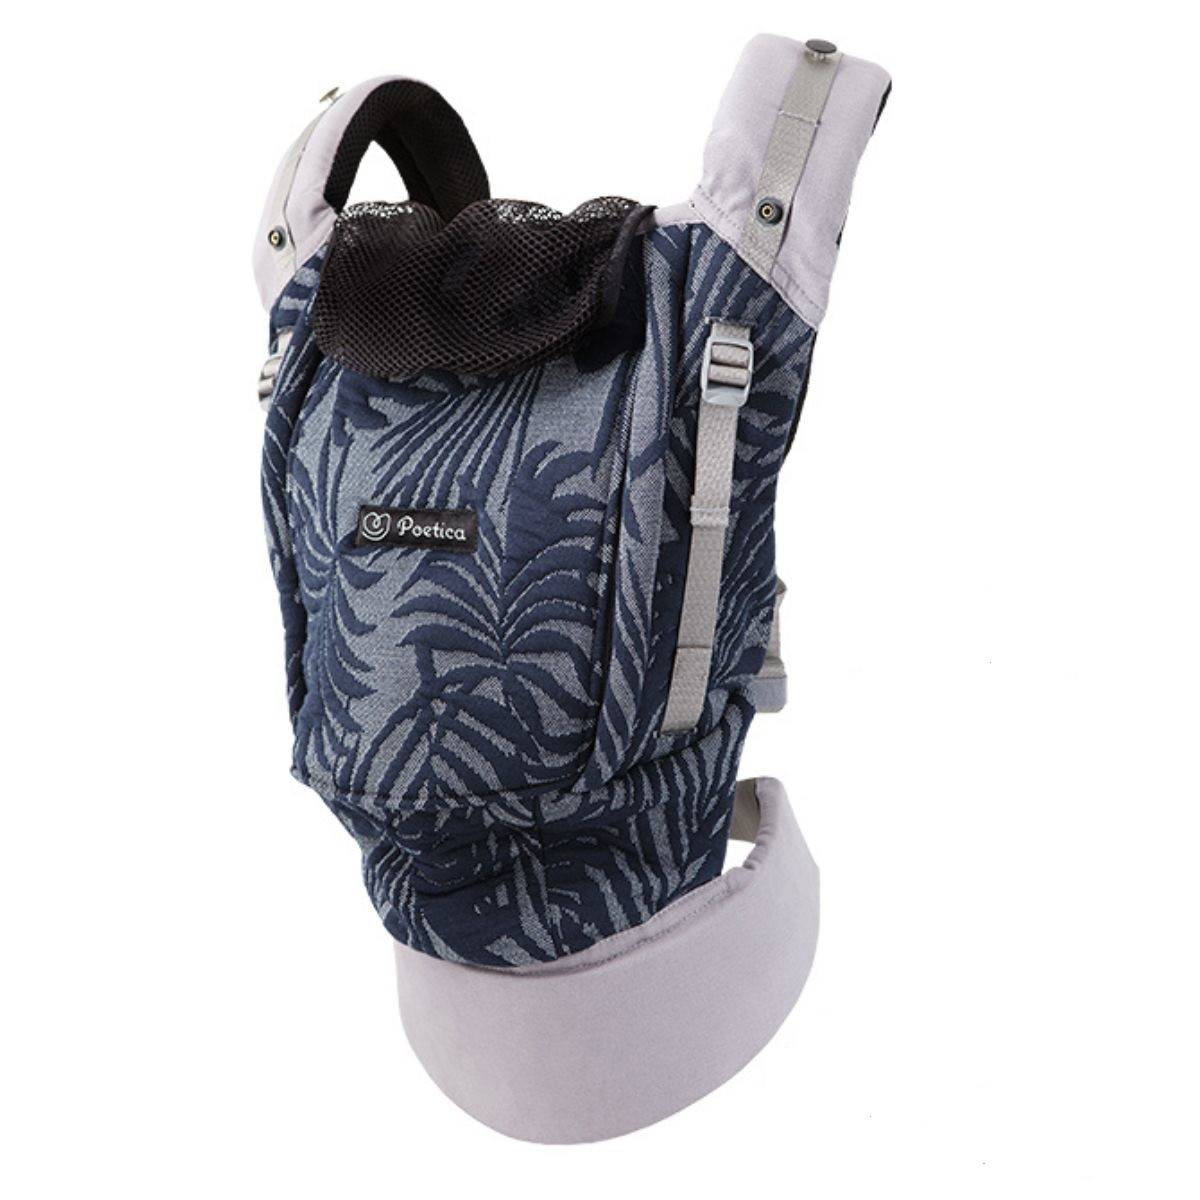 Je Porte Mon Bebe PhysioCarrier - Baby carriers - Carriers & slings